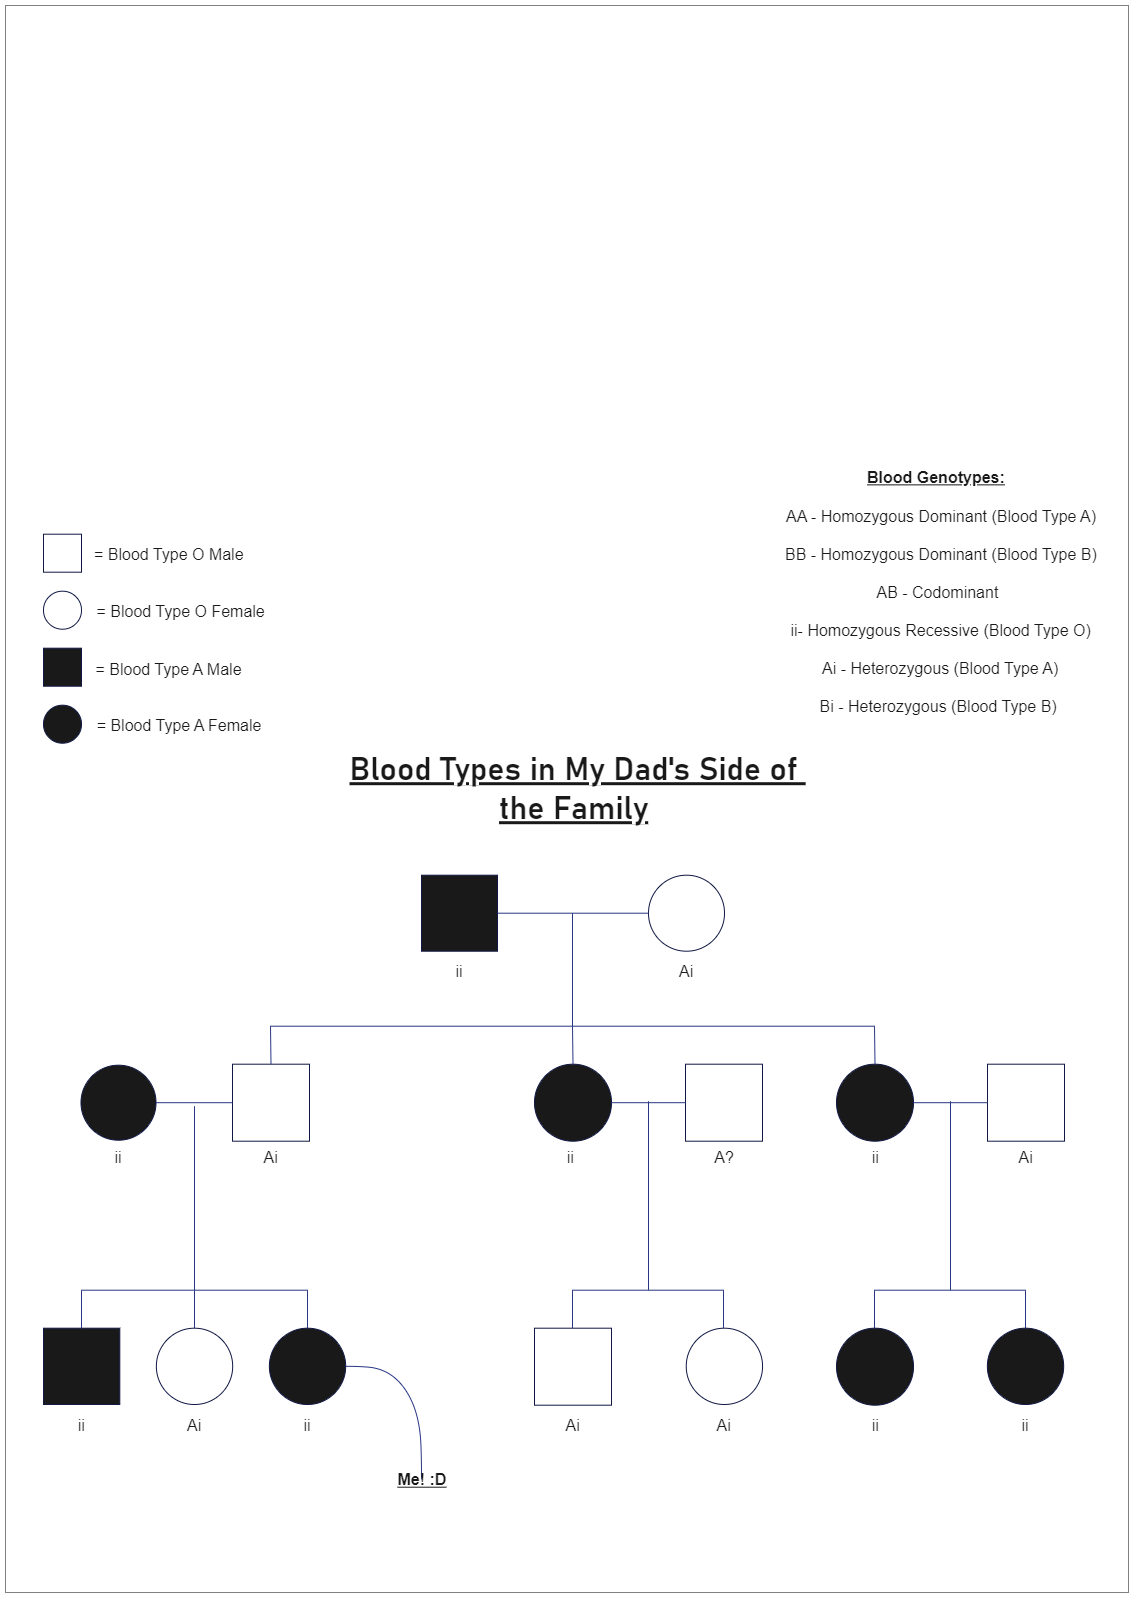 There are the blood Types in my father's side family genogram, which can help understand an individual's family relationships by visualizing patterns and psychological factors affecting them. A genogram is created with simple symbols representing the gend